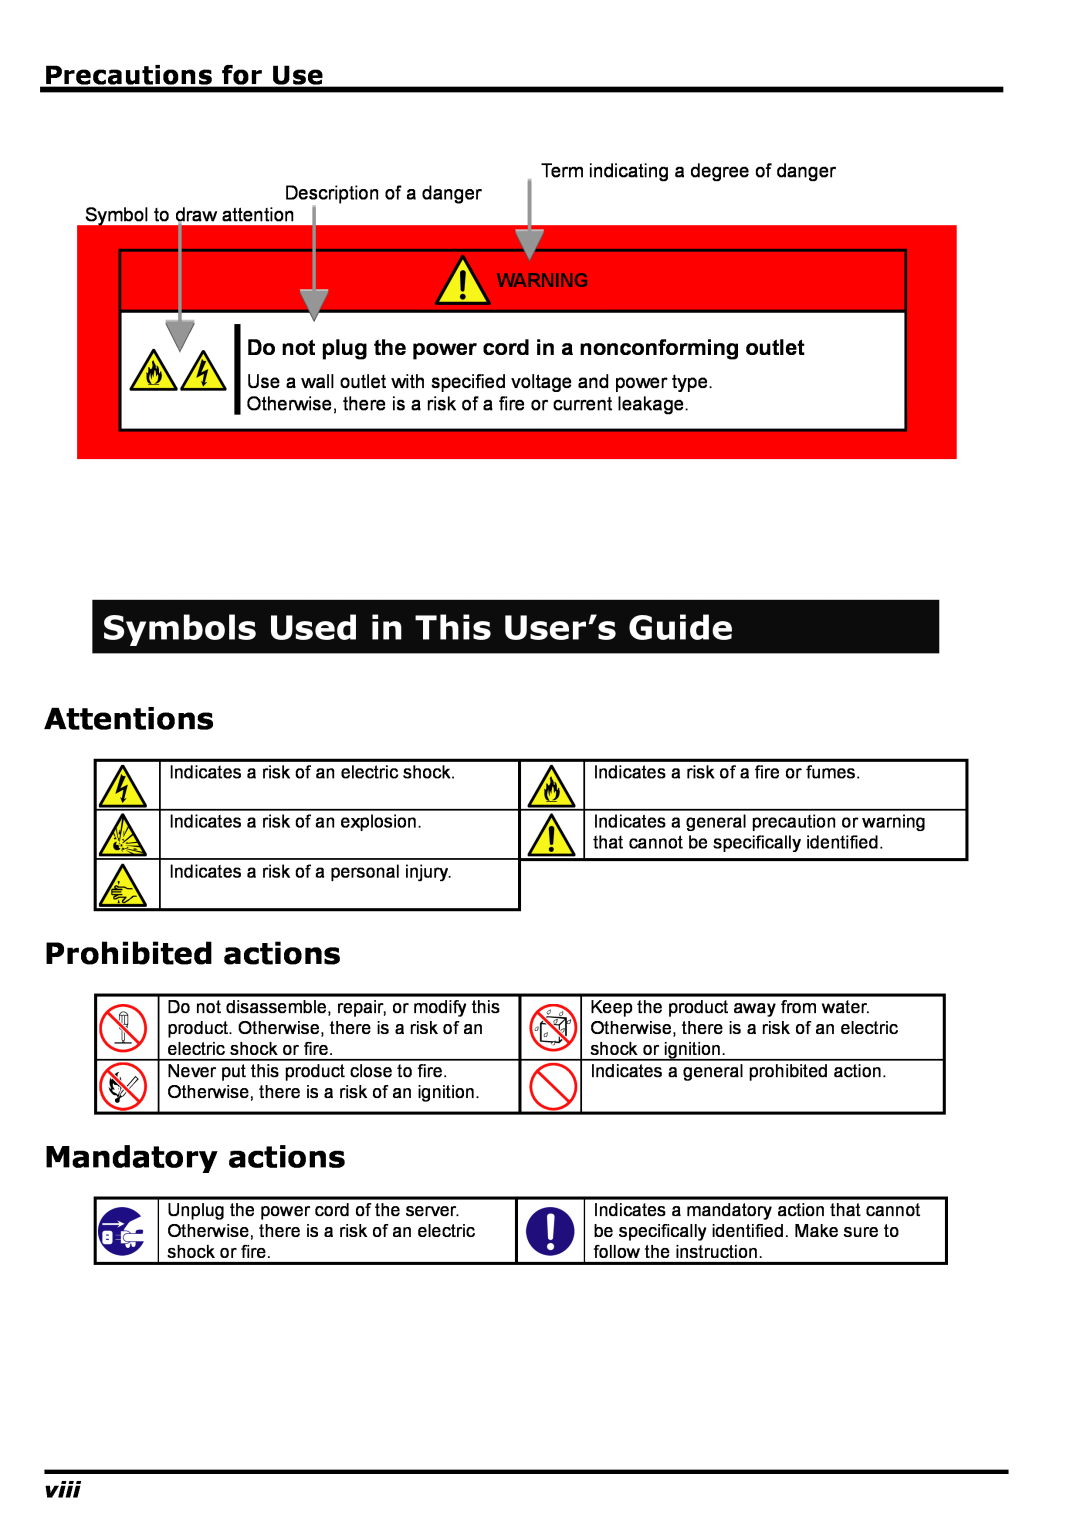 NEC N8406-022 Symbols Used in This User’s Guide, Attentions, Prohibited actions, Mandatory actions, Precautions for Use 